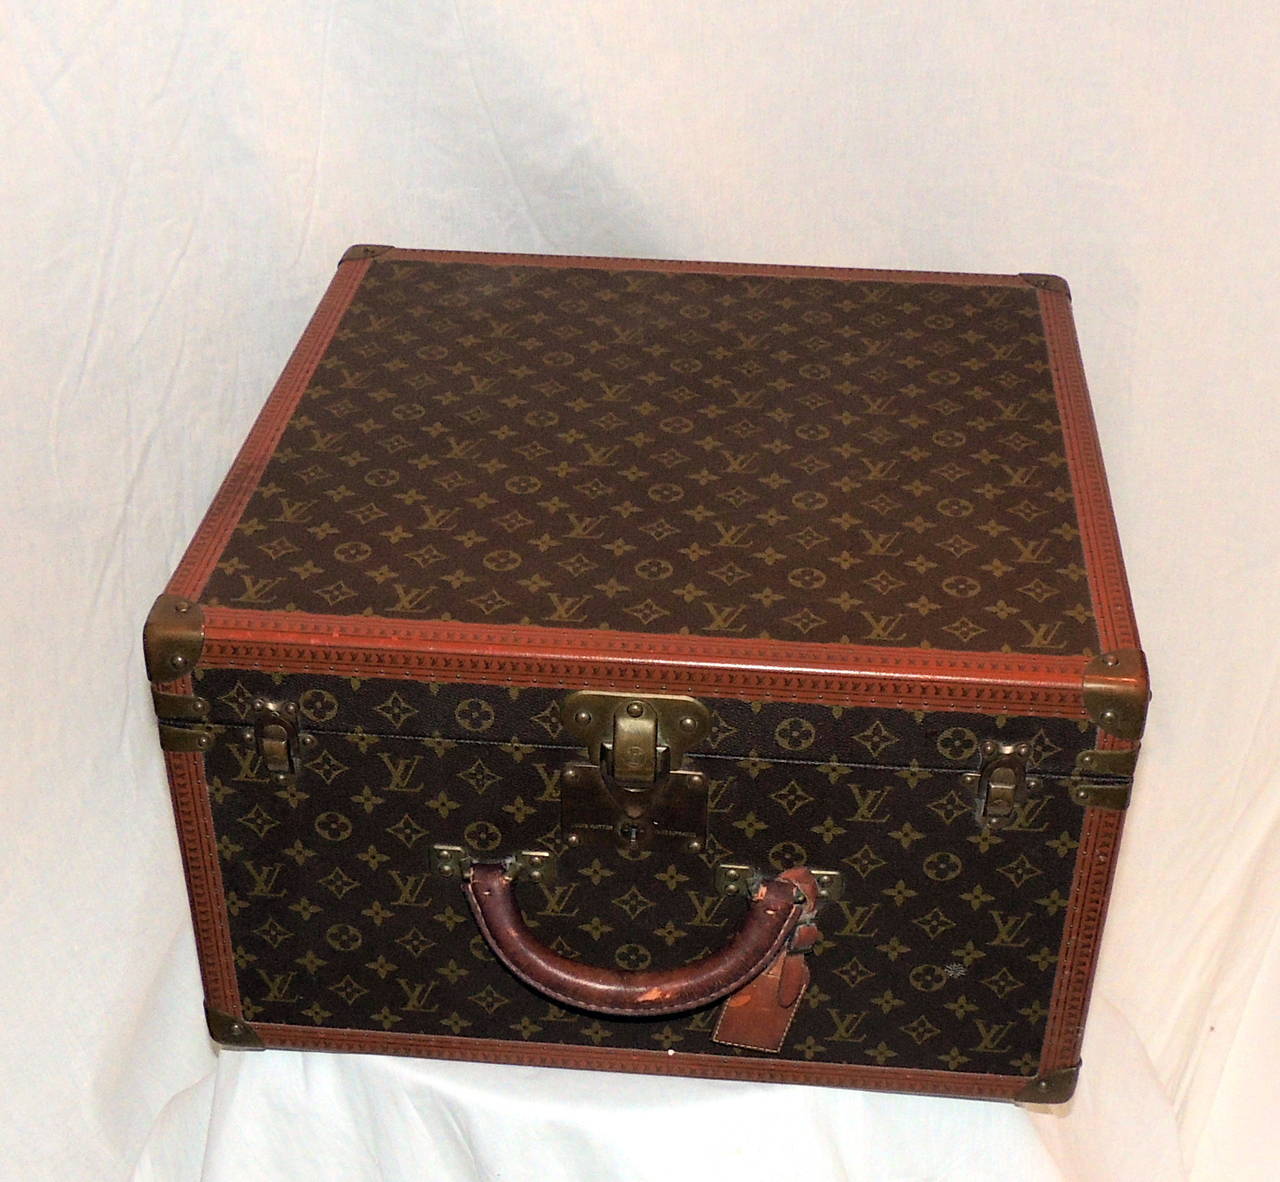 A wonderful small trunk from Louis Vuitton with original tray and keys. Very minor signs of use, some just from storage. The original tray is in very good condition and the original keys are included. The handle shows wear from handling and the